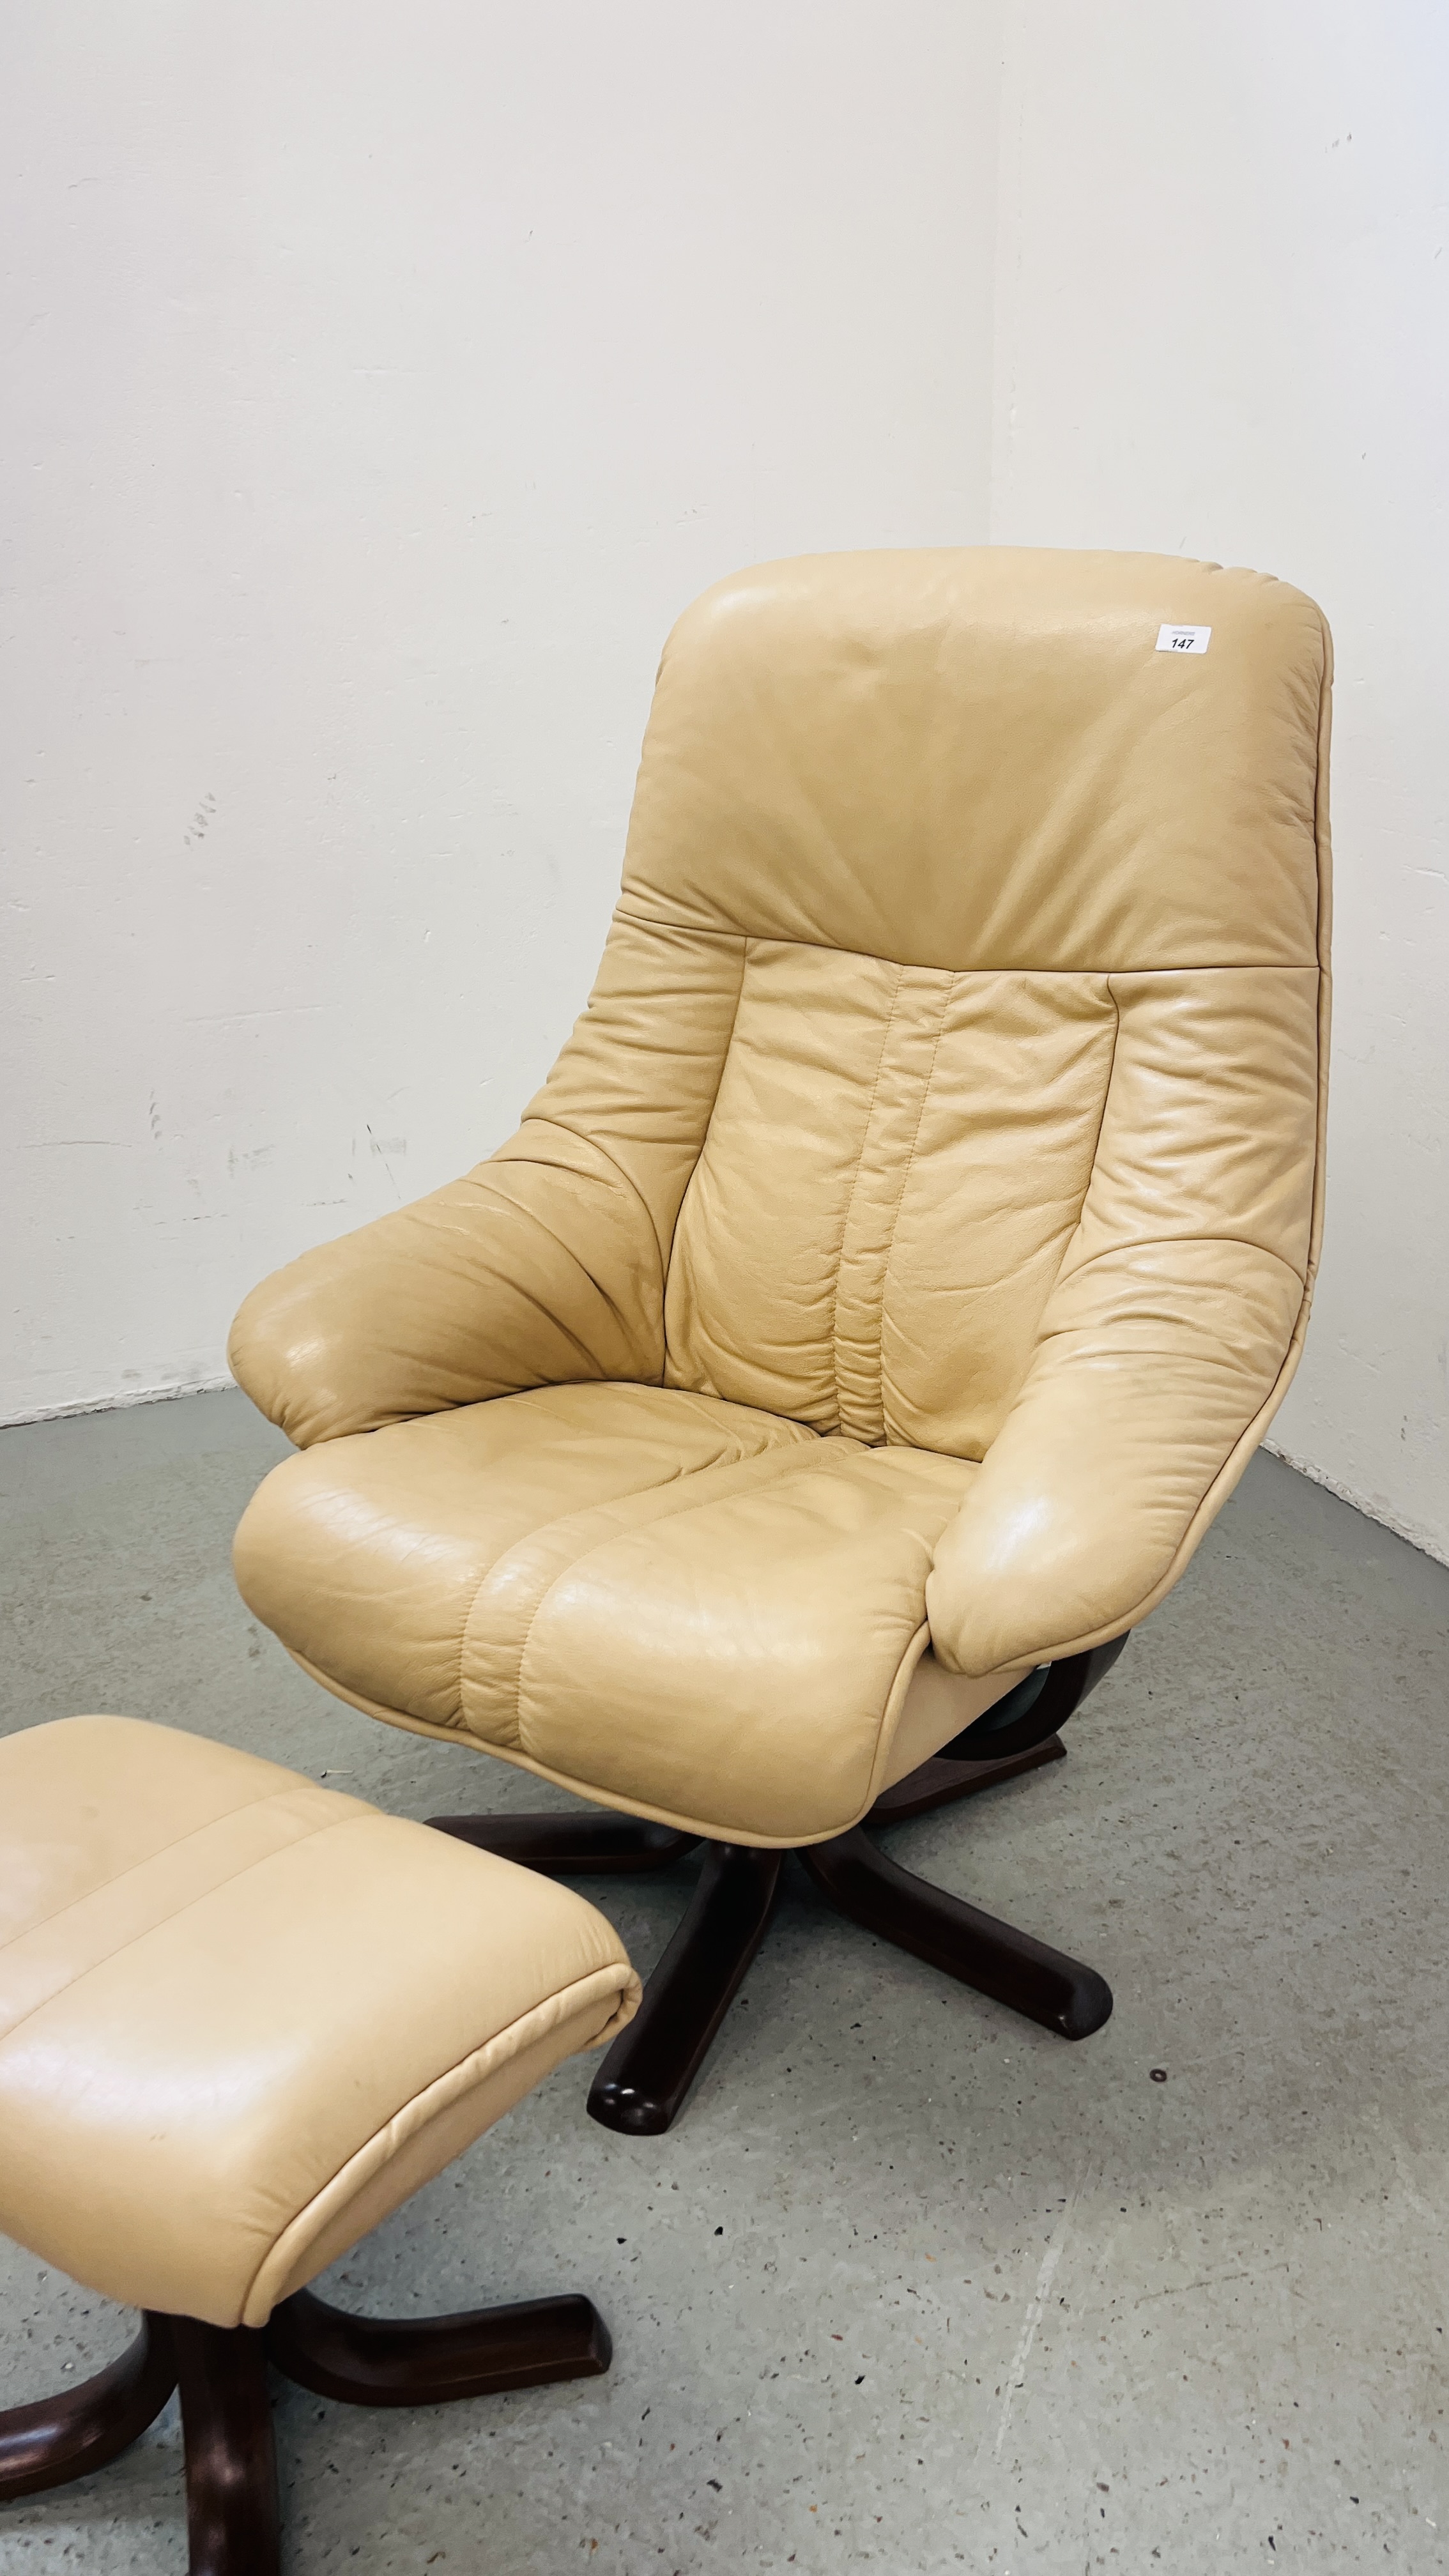 A CREAM LEATHER SWIVEL RELAXER CHAIR WITH MATCHING FOOTSTOOL - Image 2 of 11